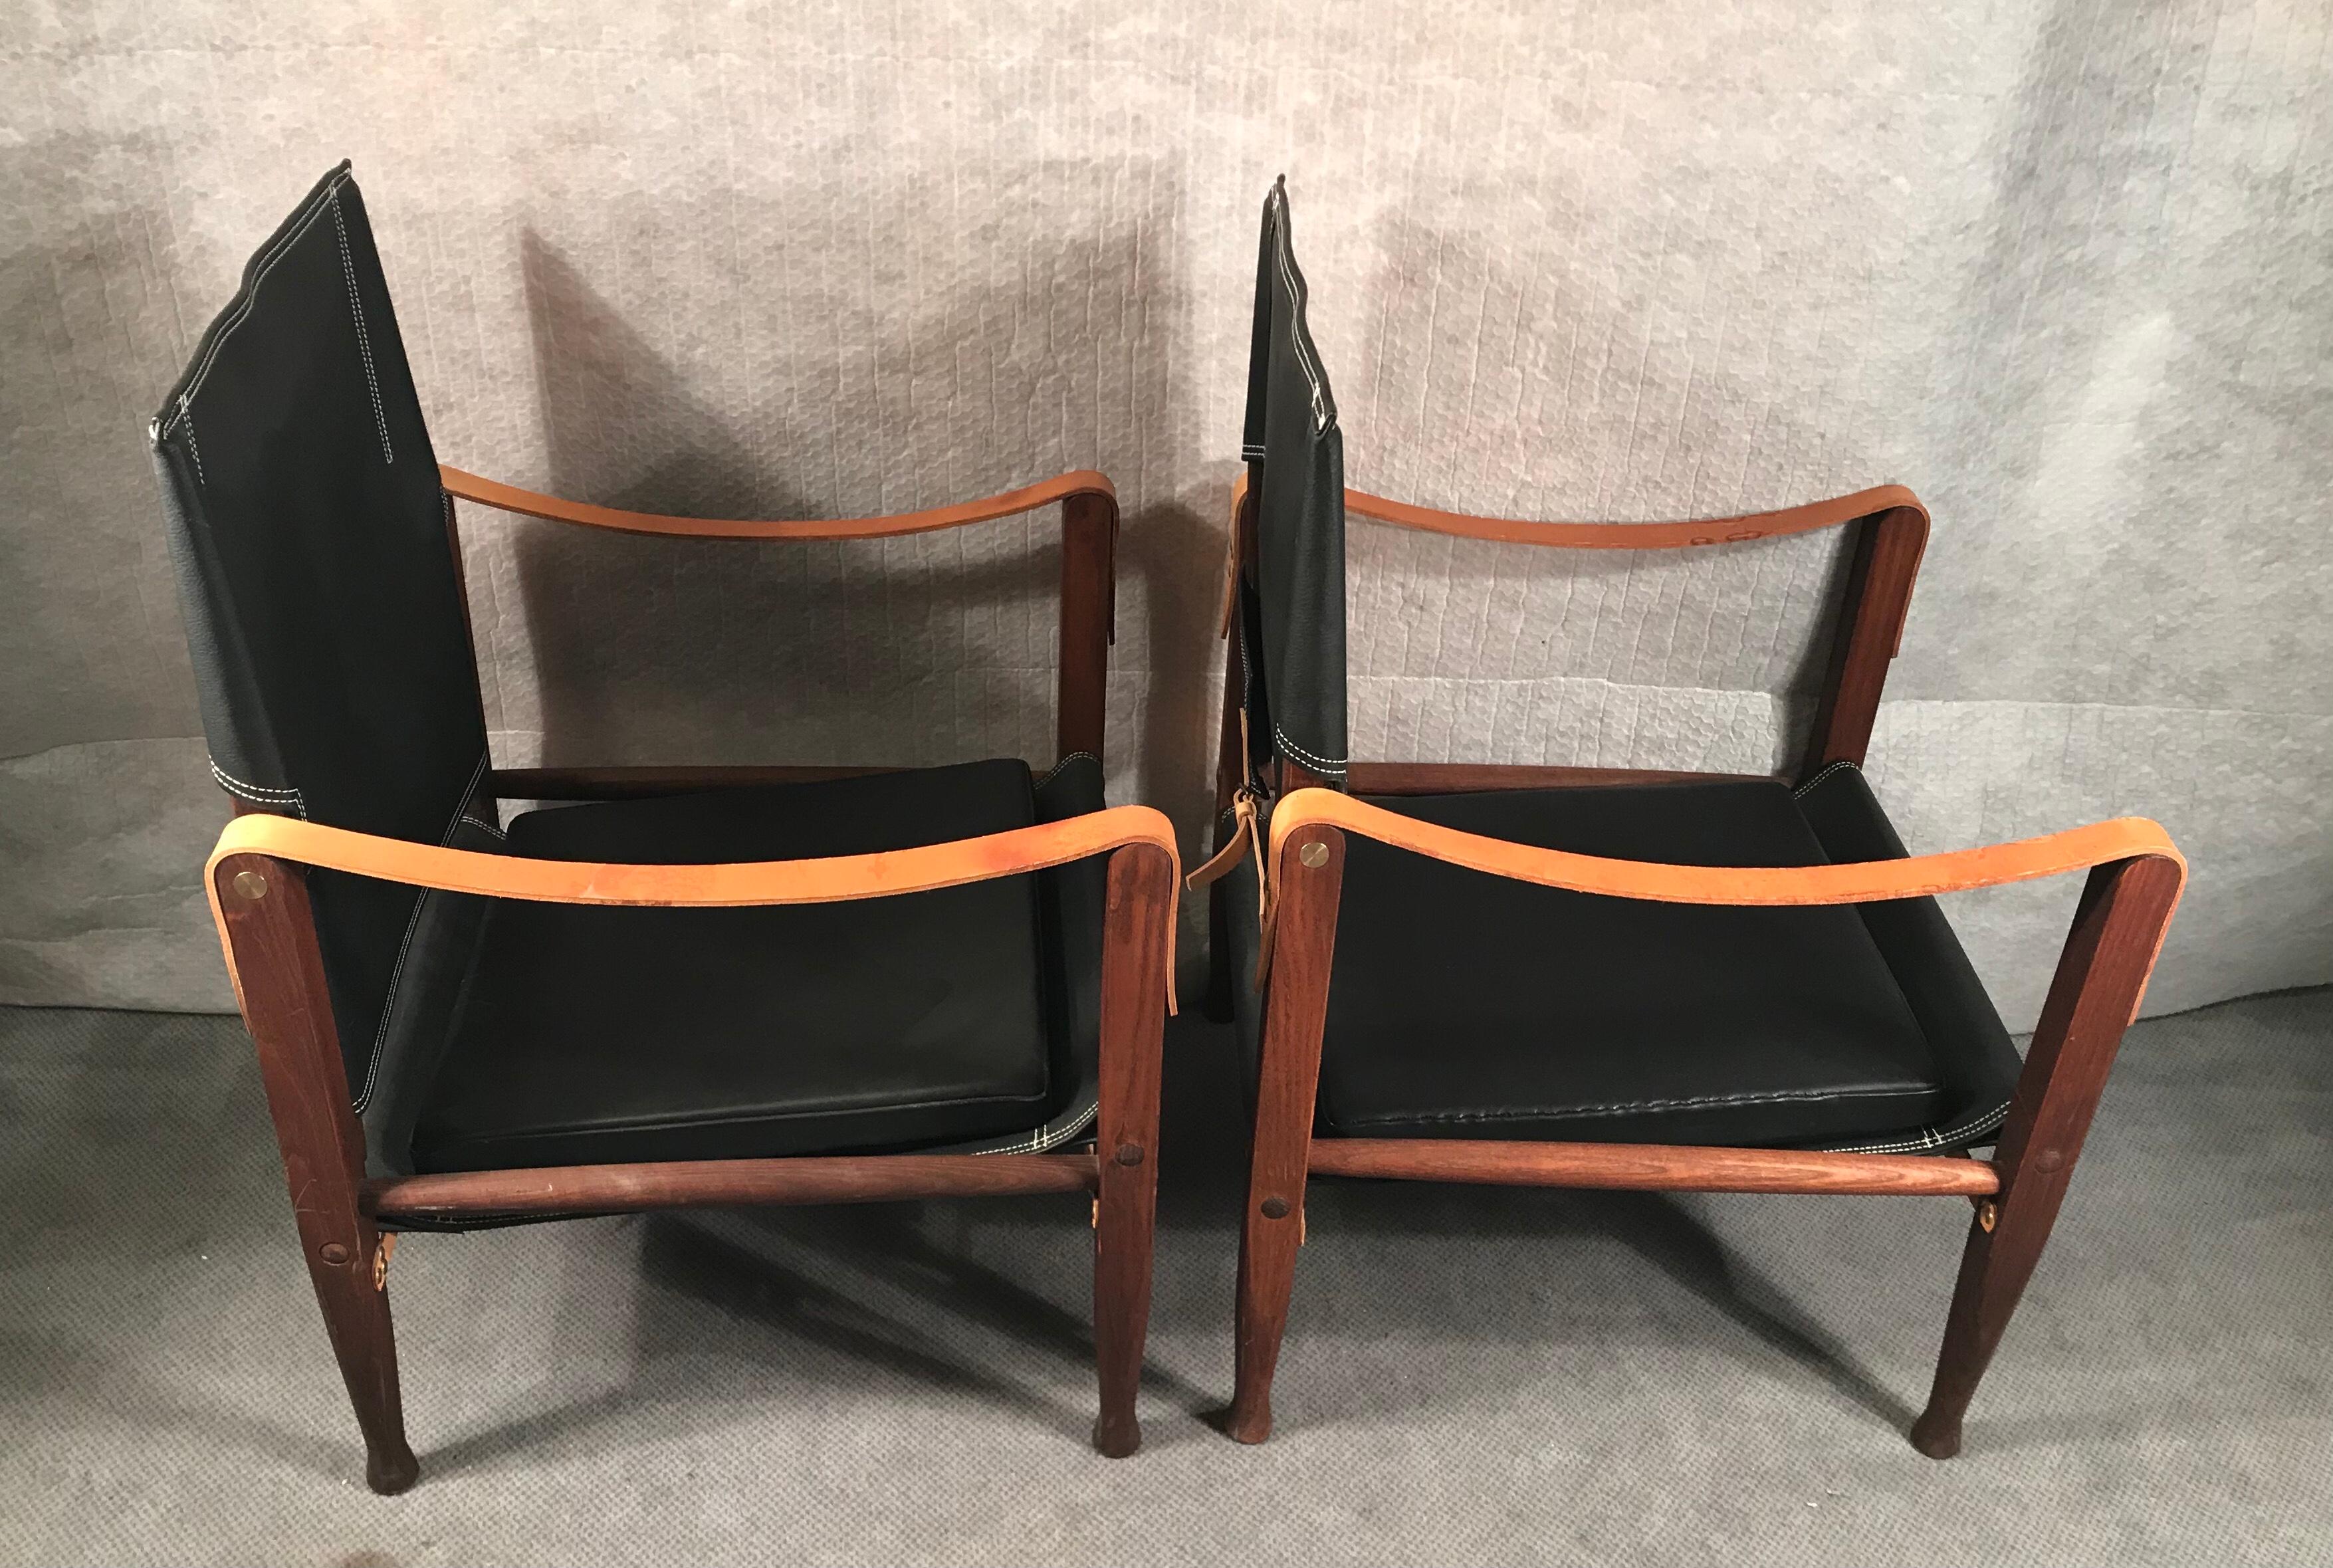 Pair of Safari chairs by Kaare Klint
The original design for the so called Safari chairs dates back to 1933.

The exposed teak frame uses the support of doweled rods, slung leather, and brass buckled straps. The backrest swivels for added